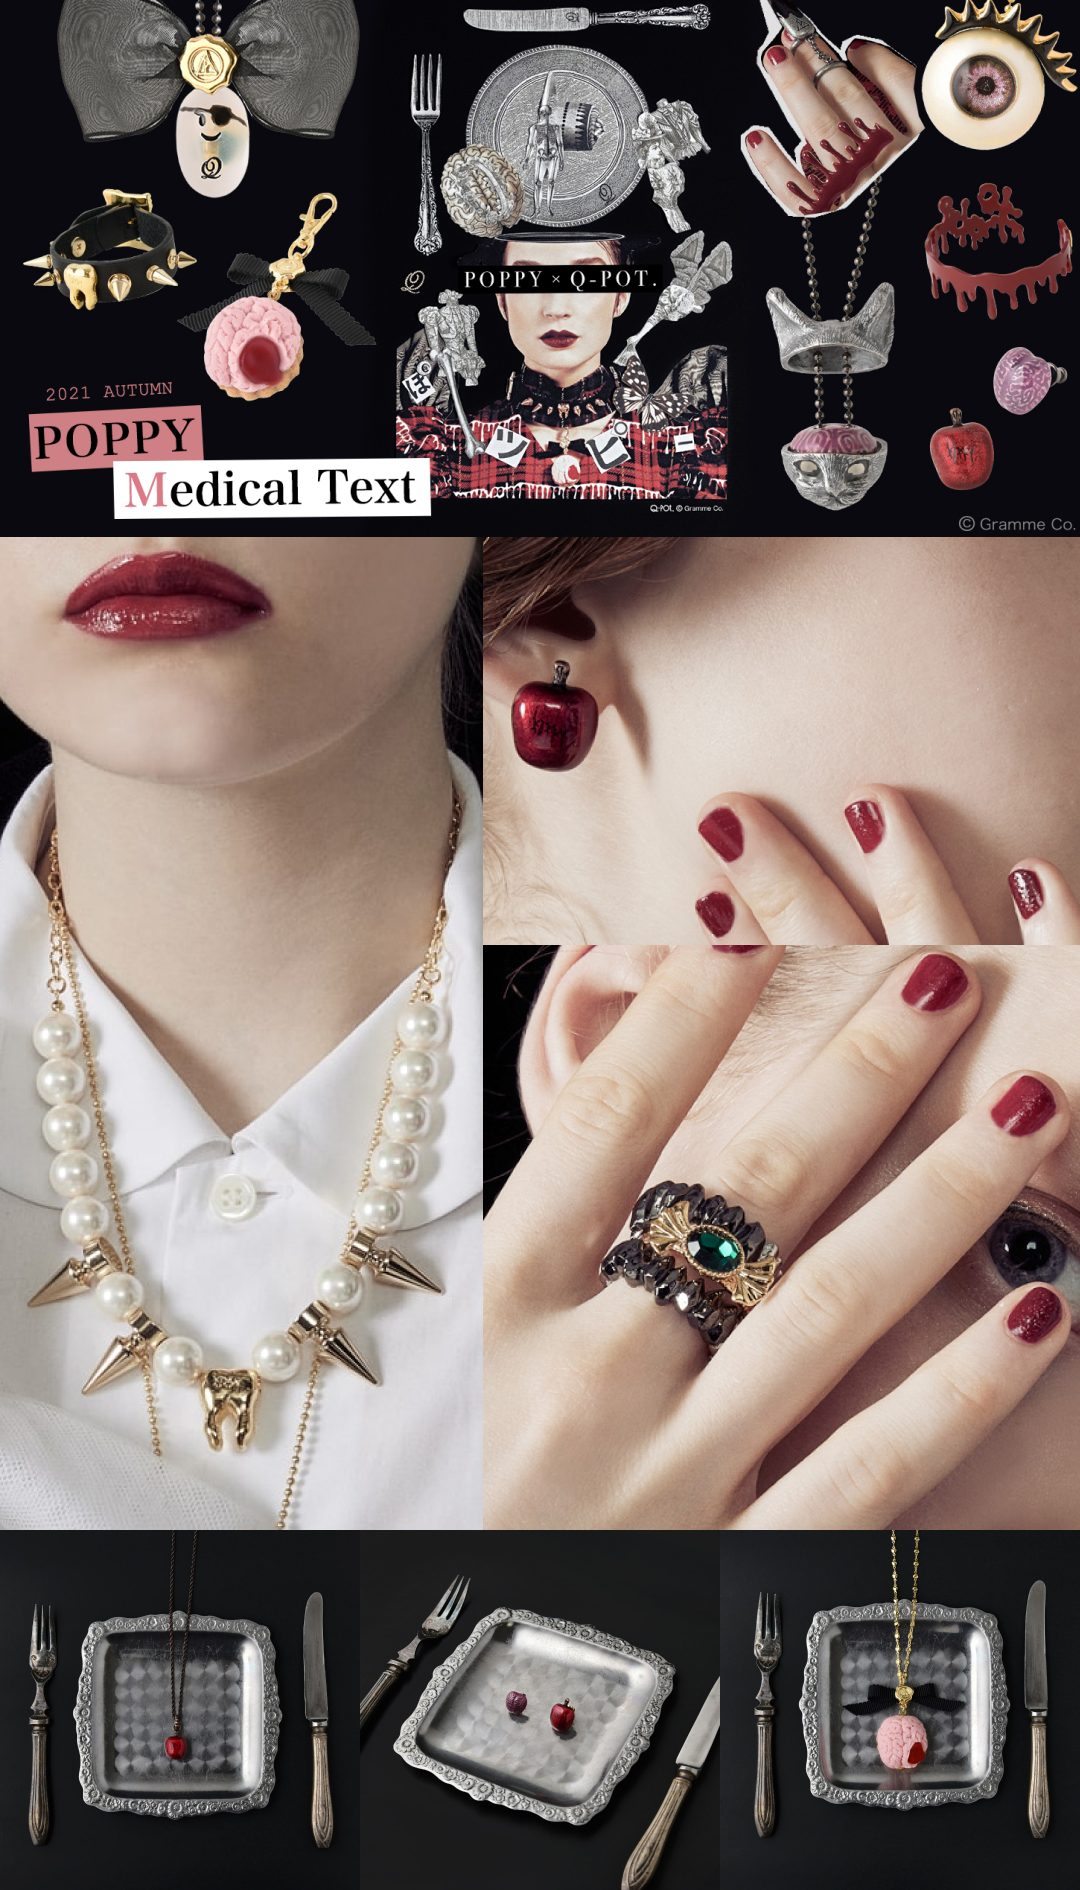 Poppy x Q-pot. Collaboration - Q-pot. is the first Japan sweet jewelry brand.